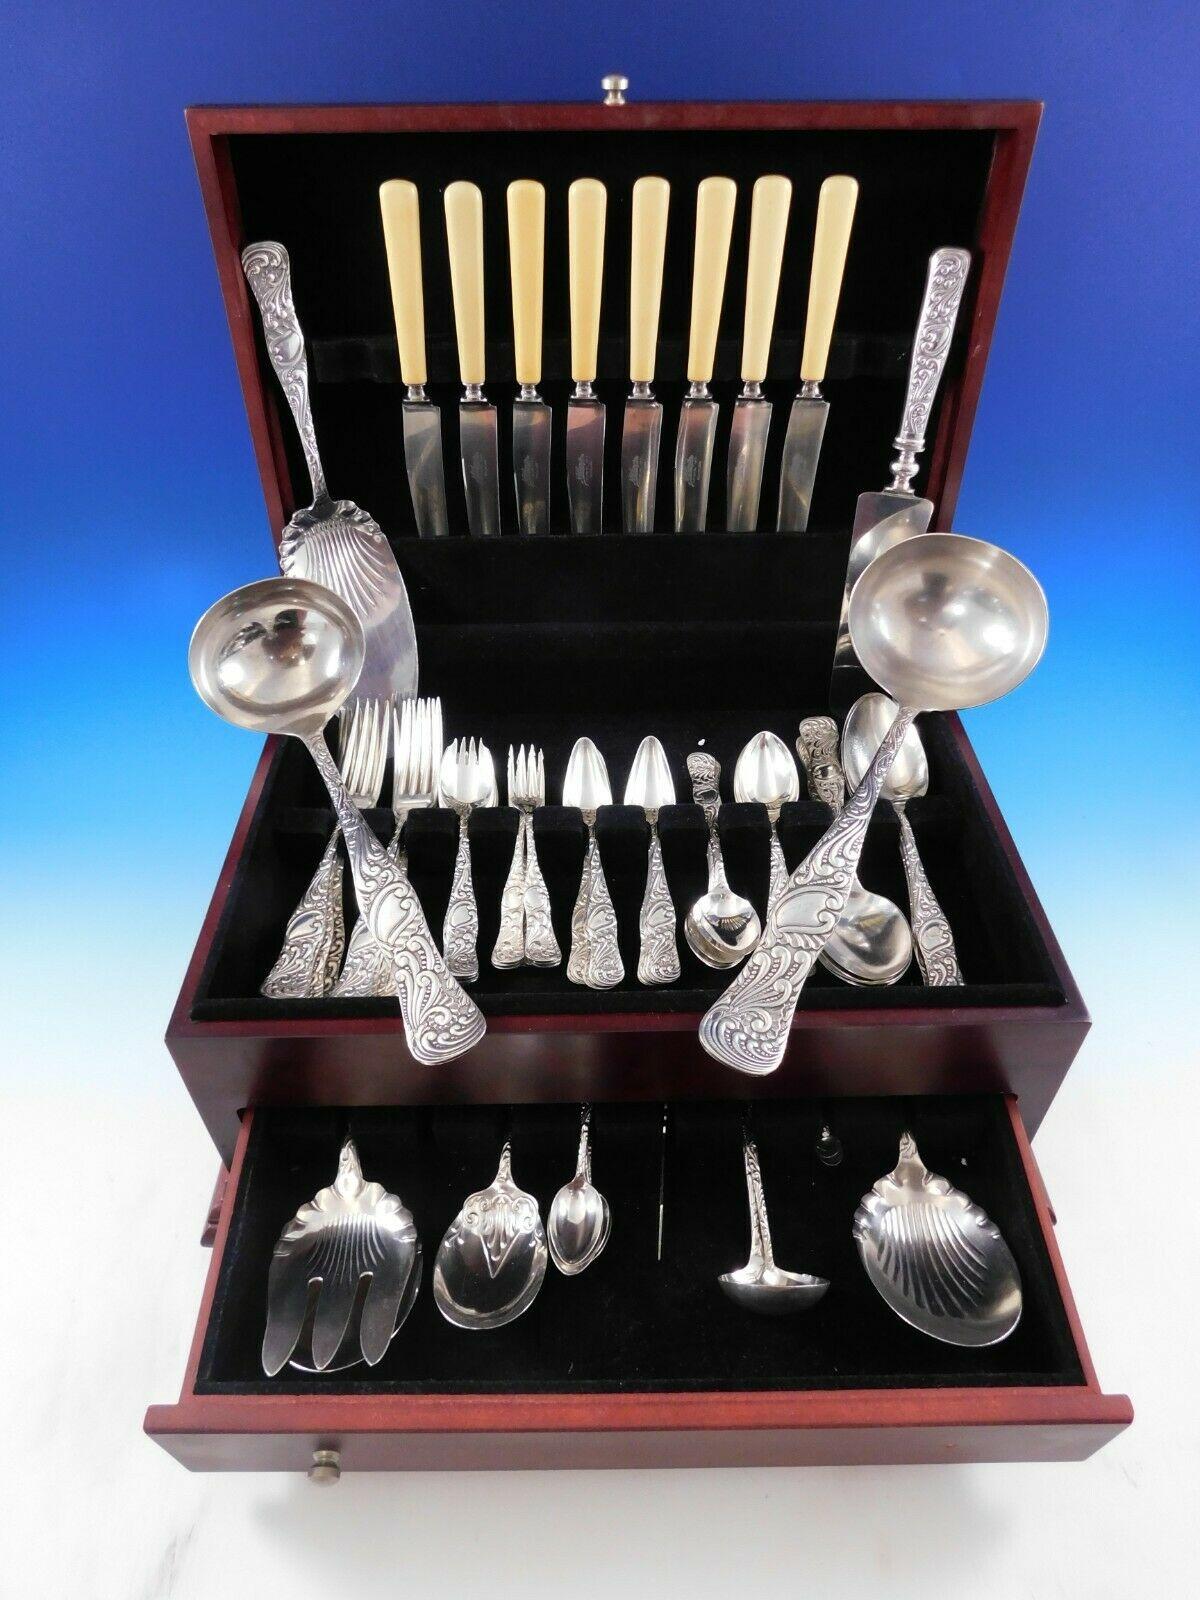 Rare Opal AKA Triumph by Wm. Rogers circa 1890 Silverplate Flatware set, 73 pieces. This set includes:

8 Knives with celluloid handles, 9 3/8